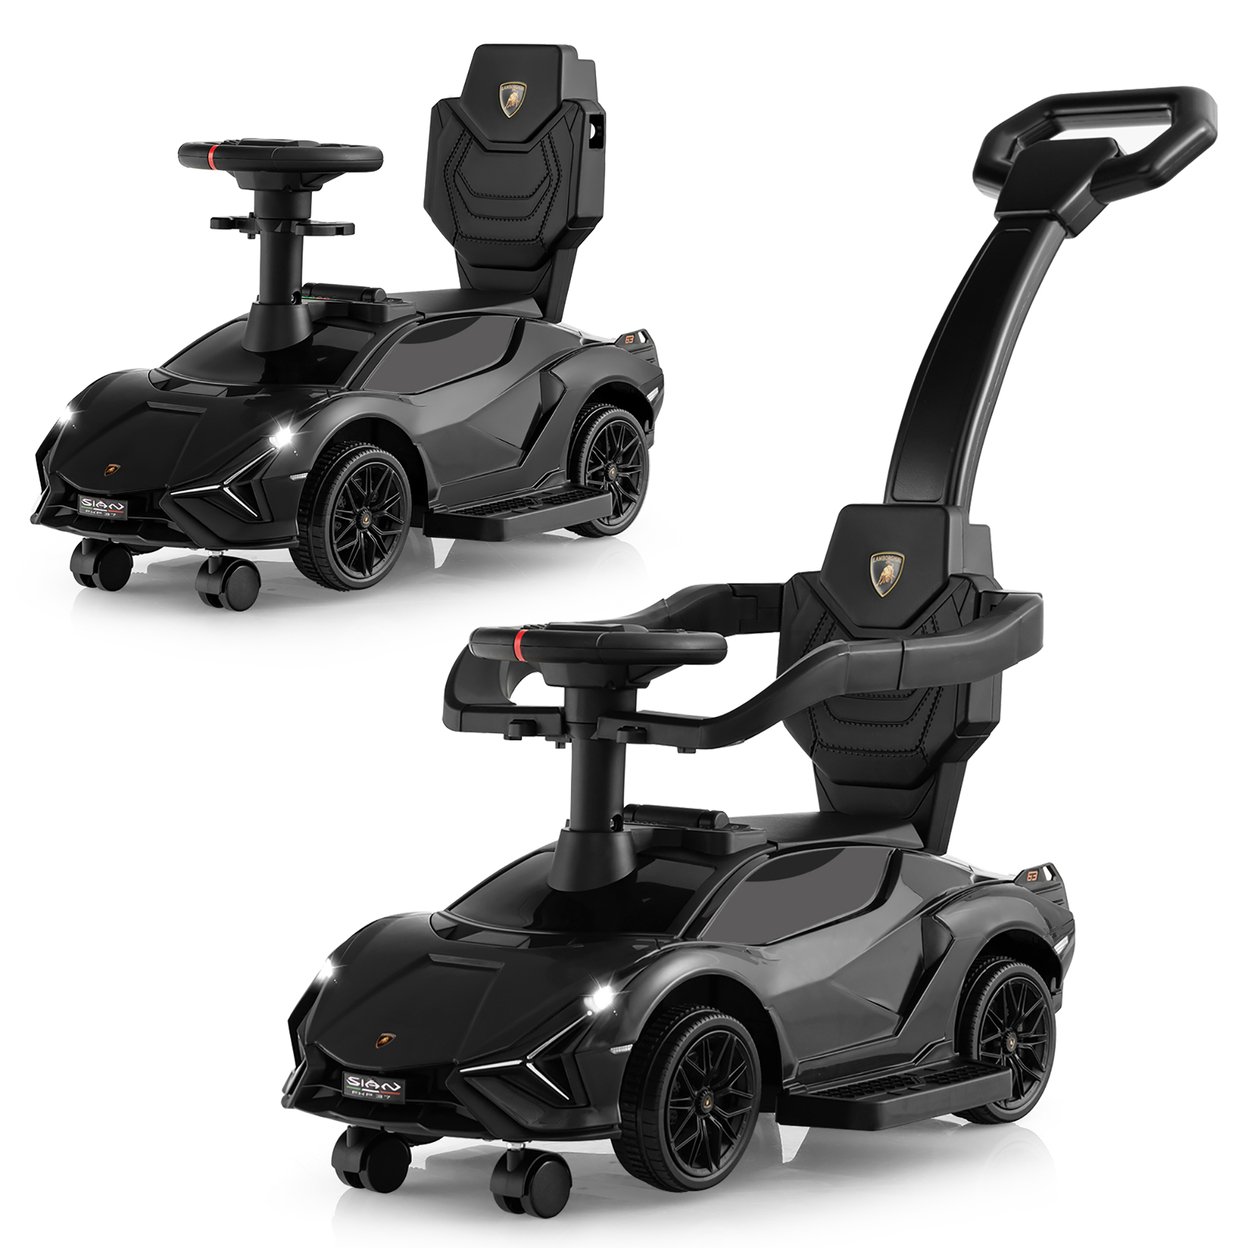 3-in-1 Licensed Lamborghini Ride On Push Car Walking Toy Stroller With USB Port - Black